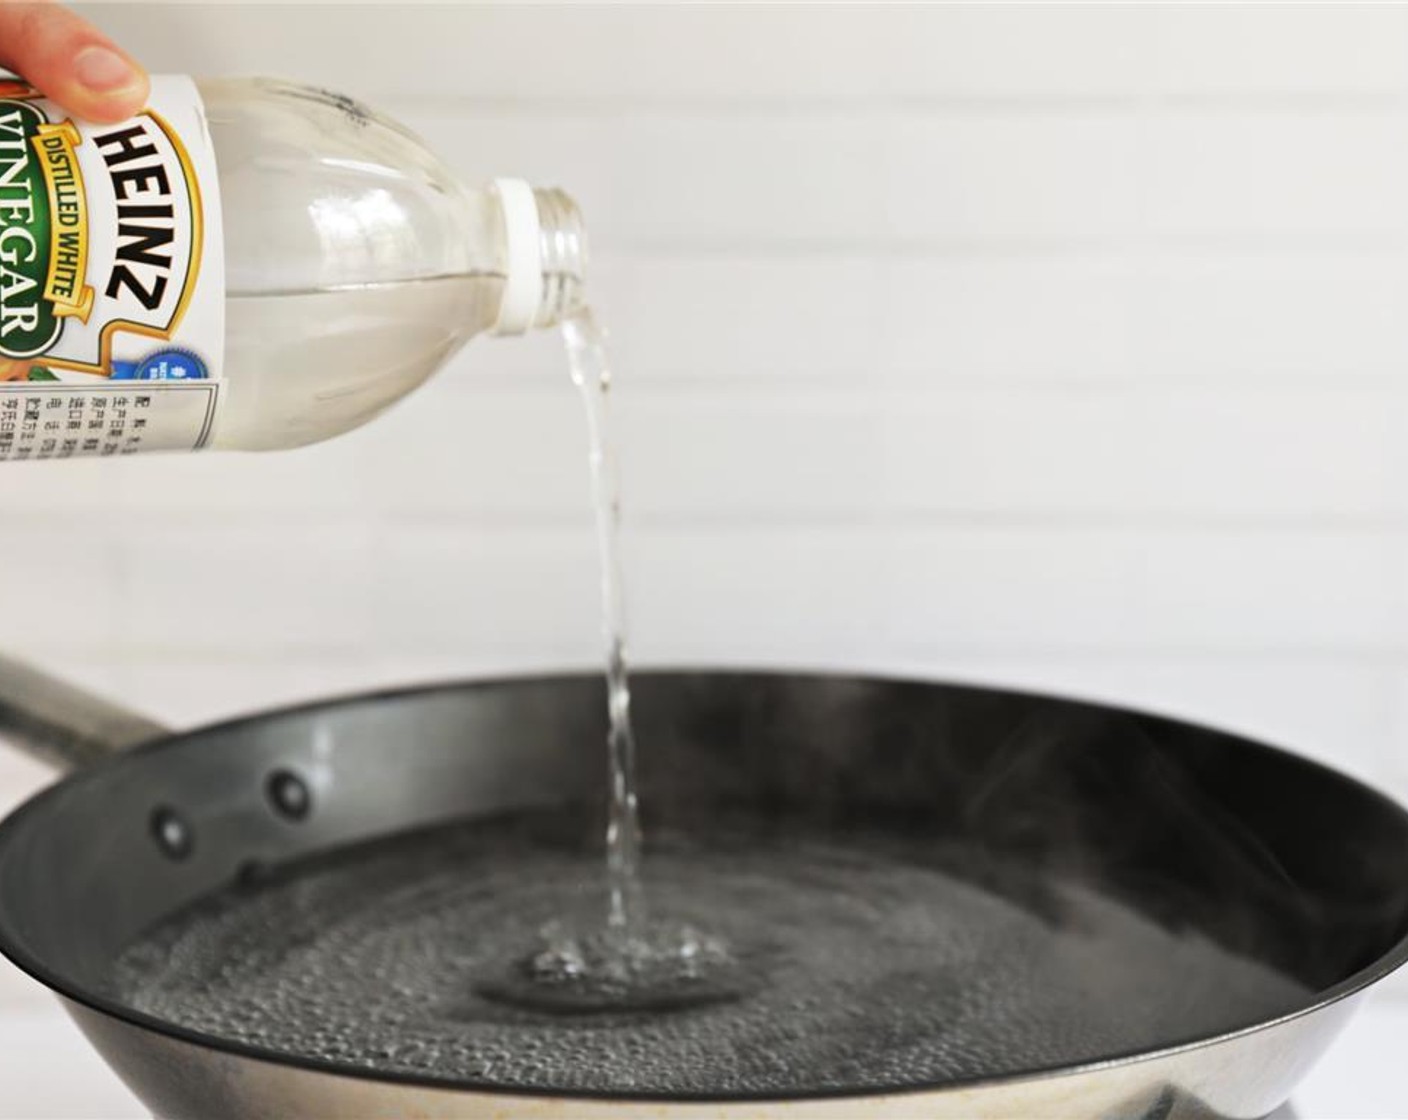 step 2 Bring to a simmer. When you see bubbles on the bottom of the water, add Distilled White Vinegar (2 Tbsp).